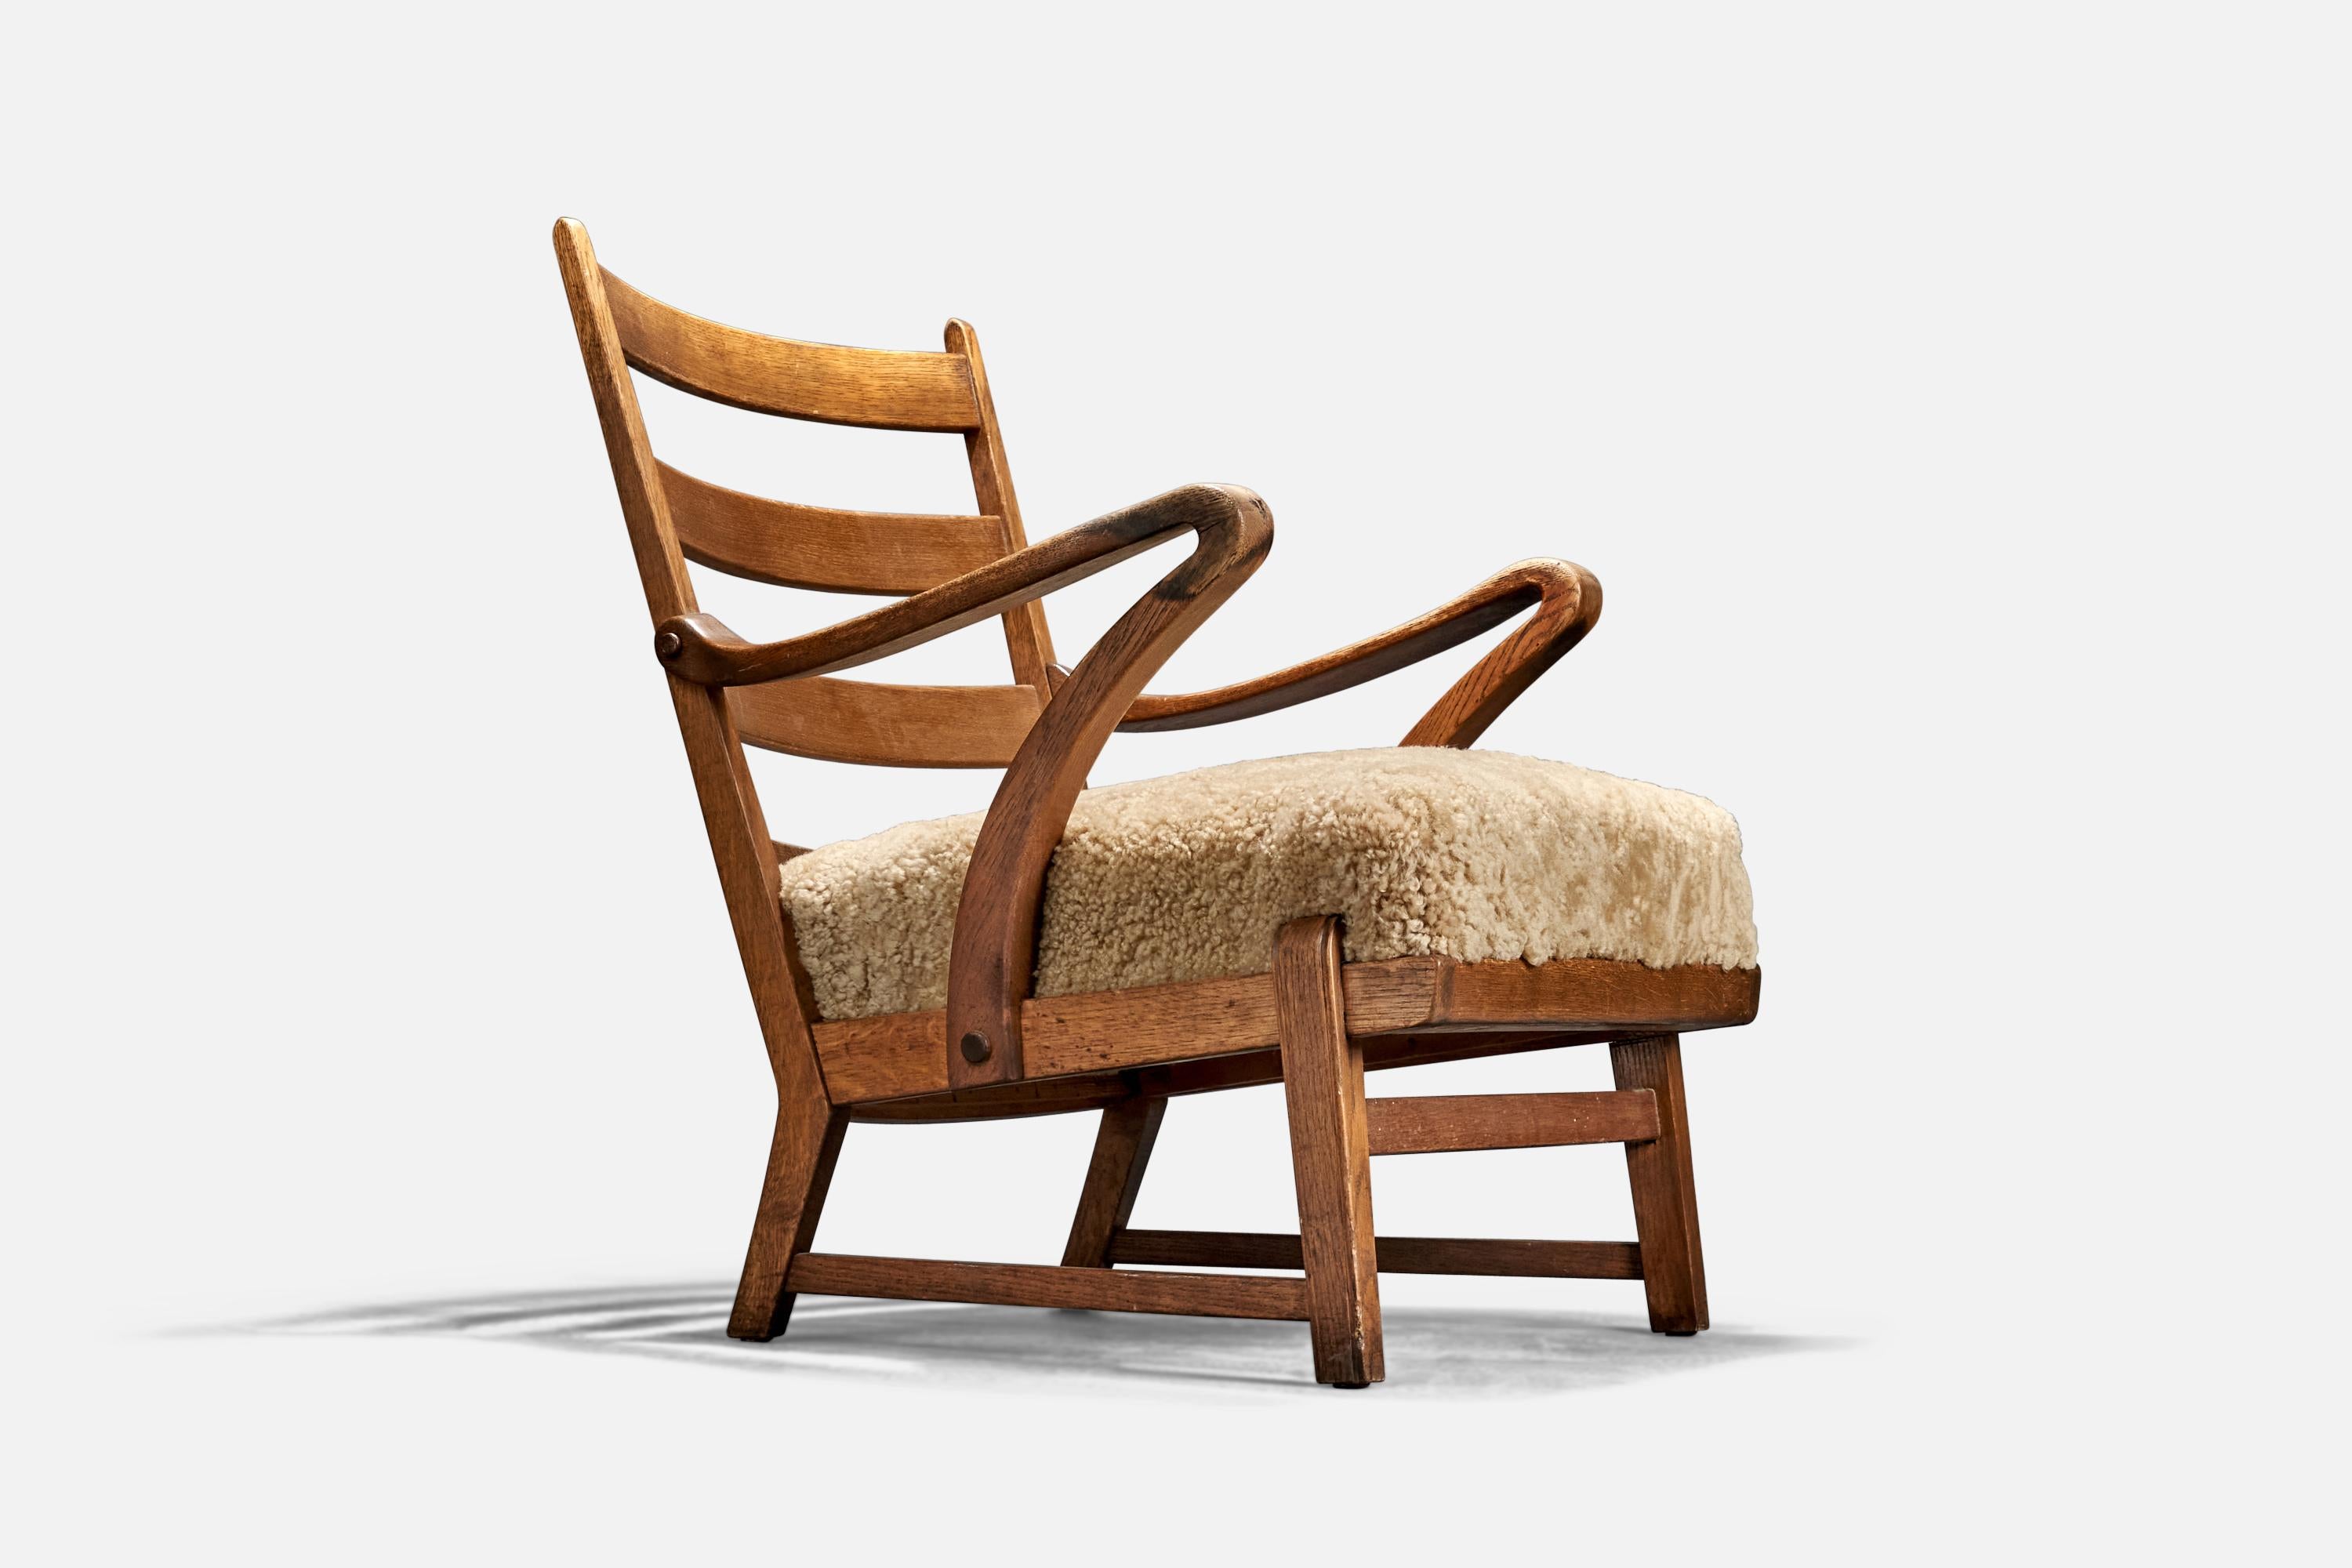 An oak and shearling lounge chair designed and produced in Denmark, 1940s.